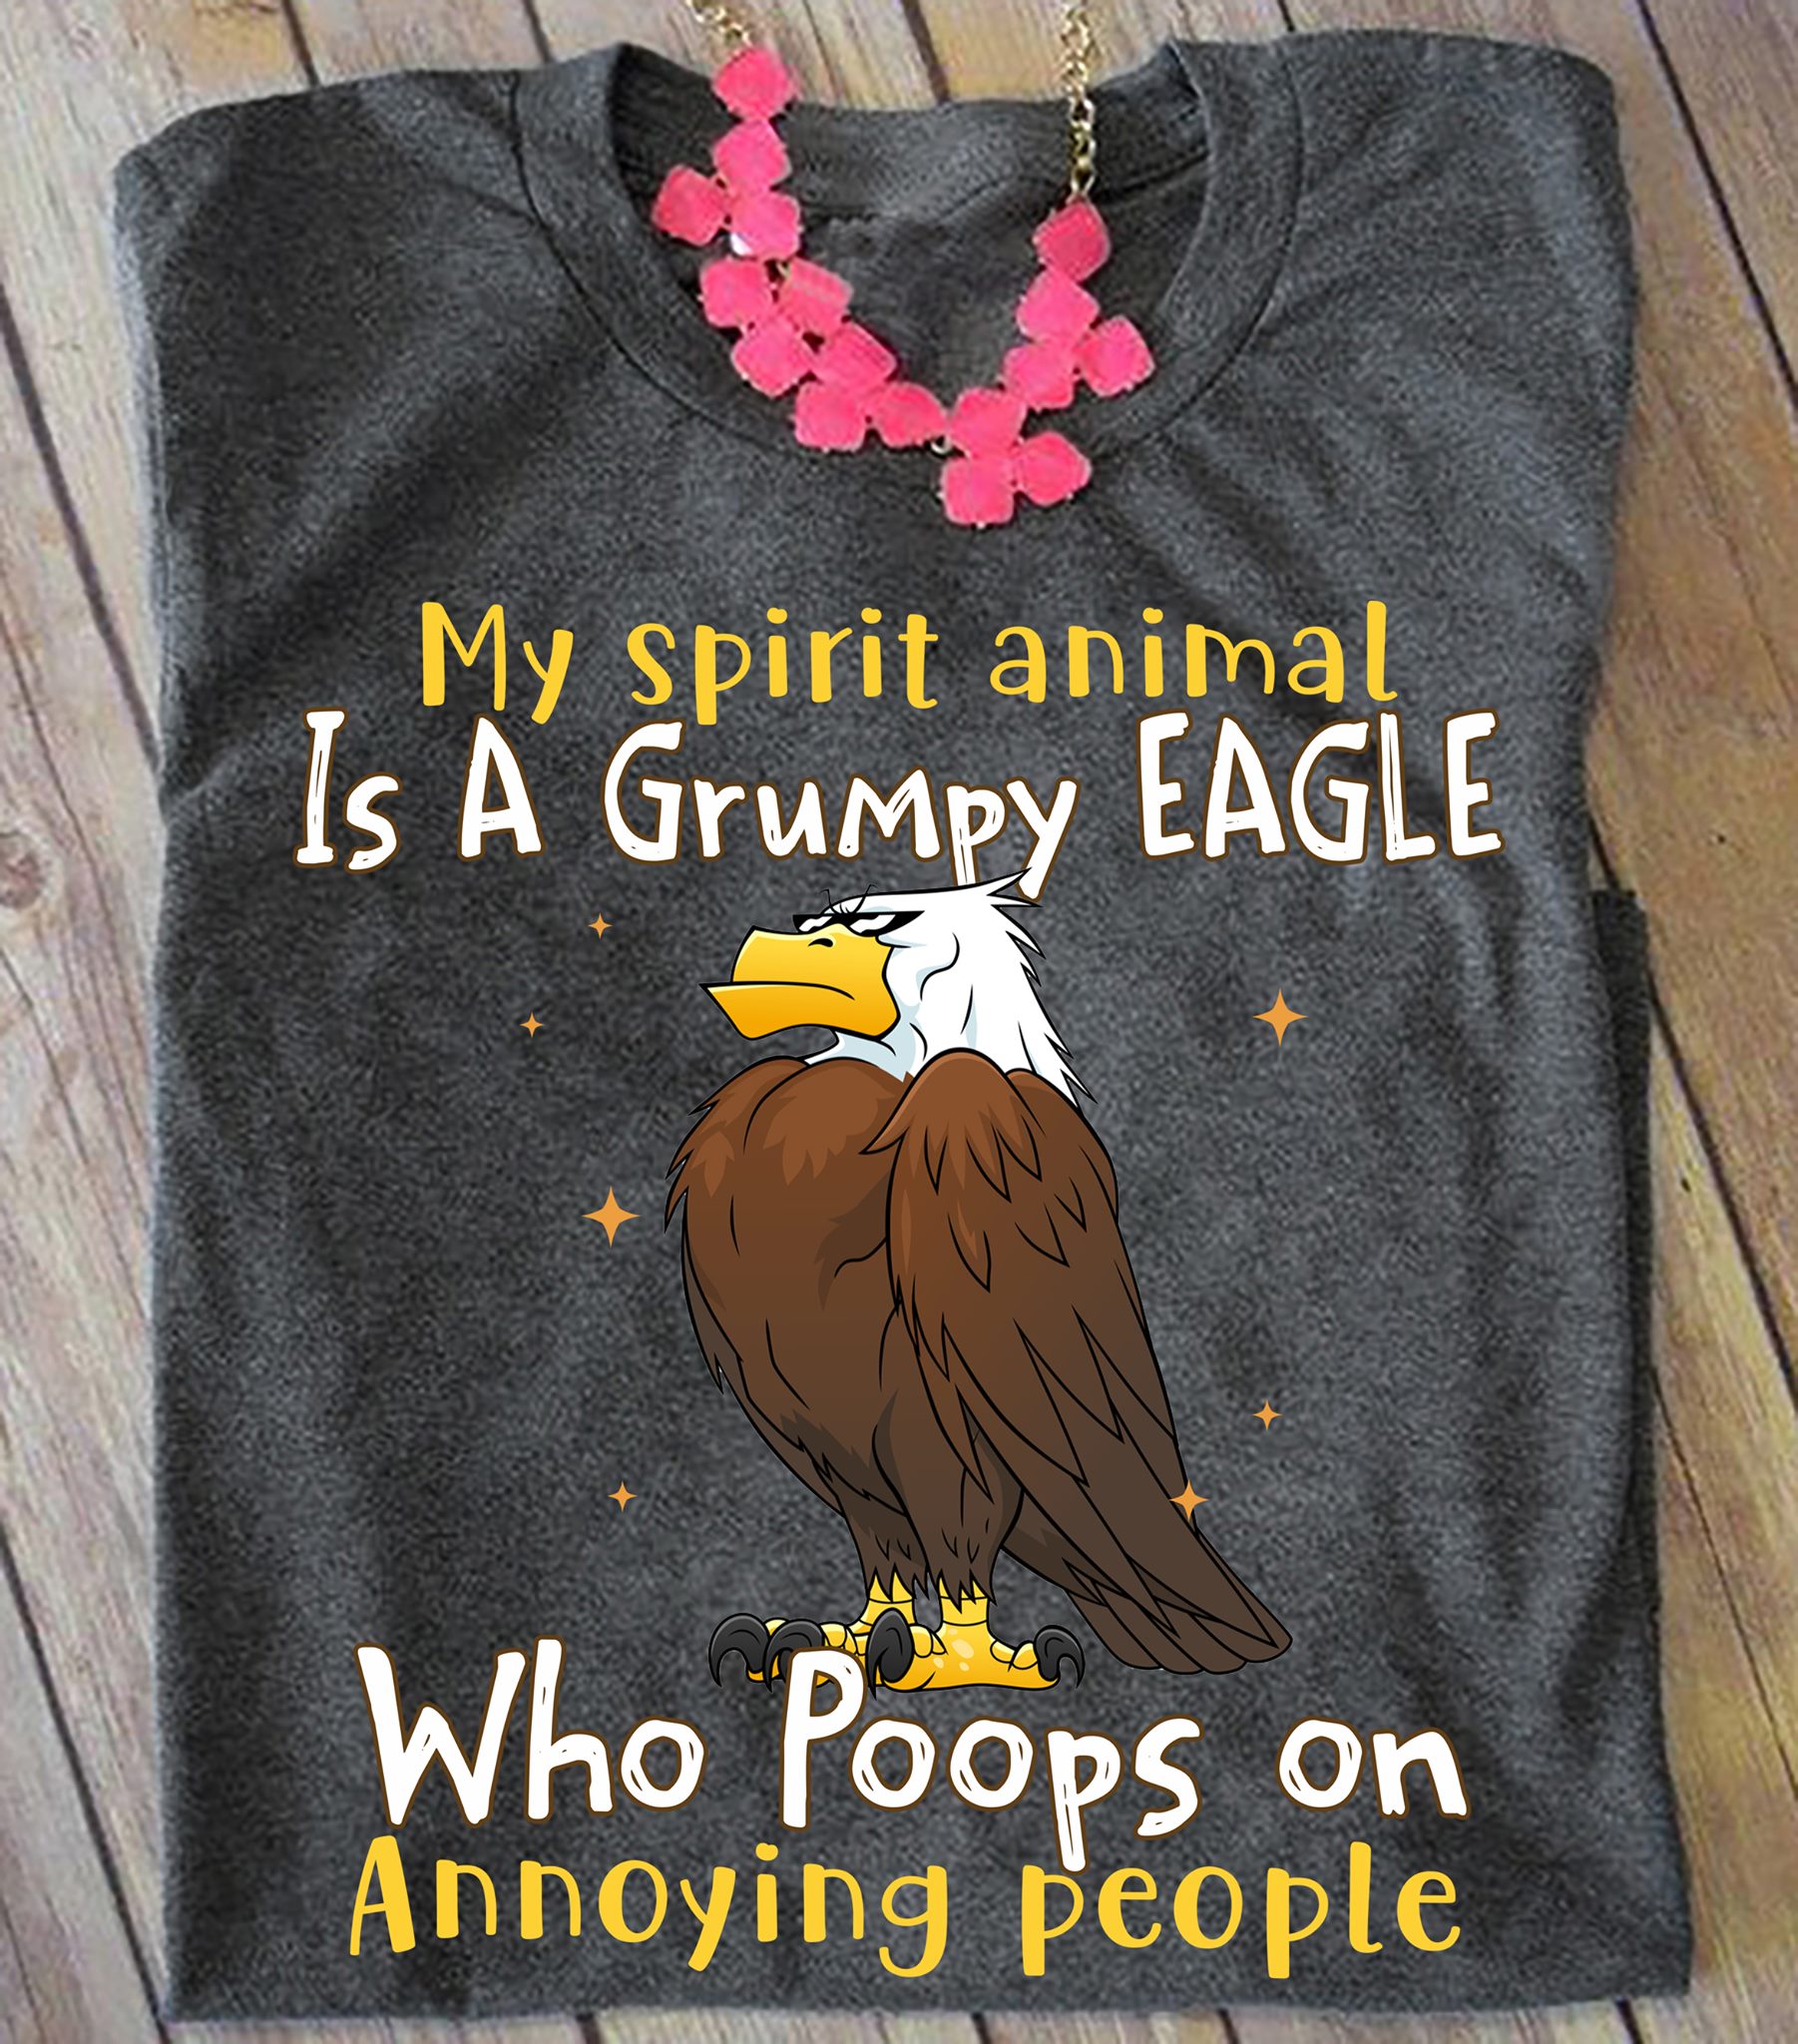 My spirit animal is a grumpy eagle who poops on annoying people